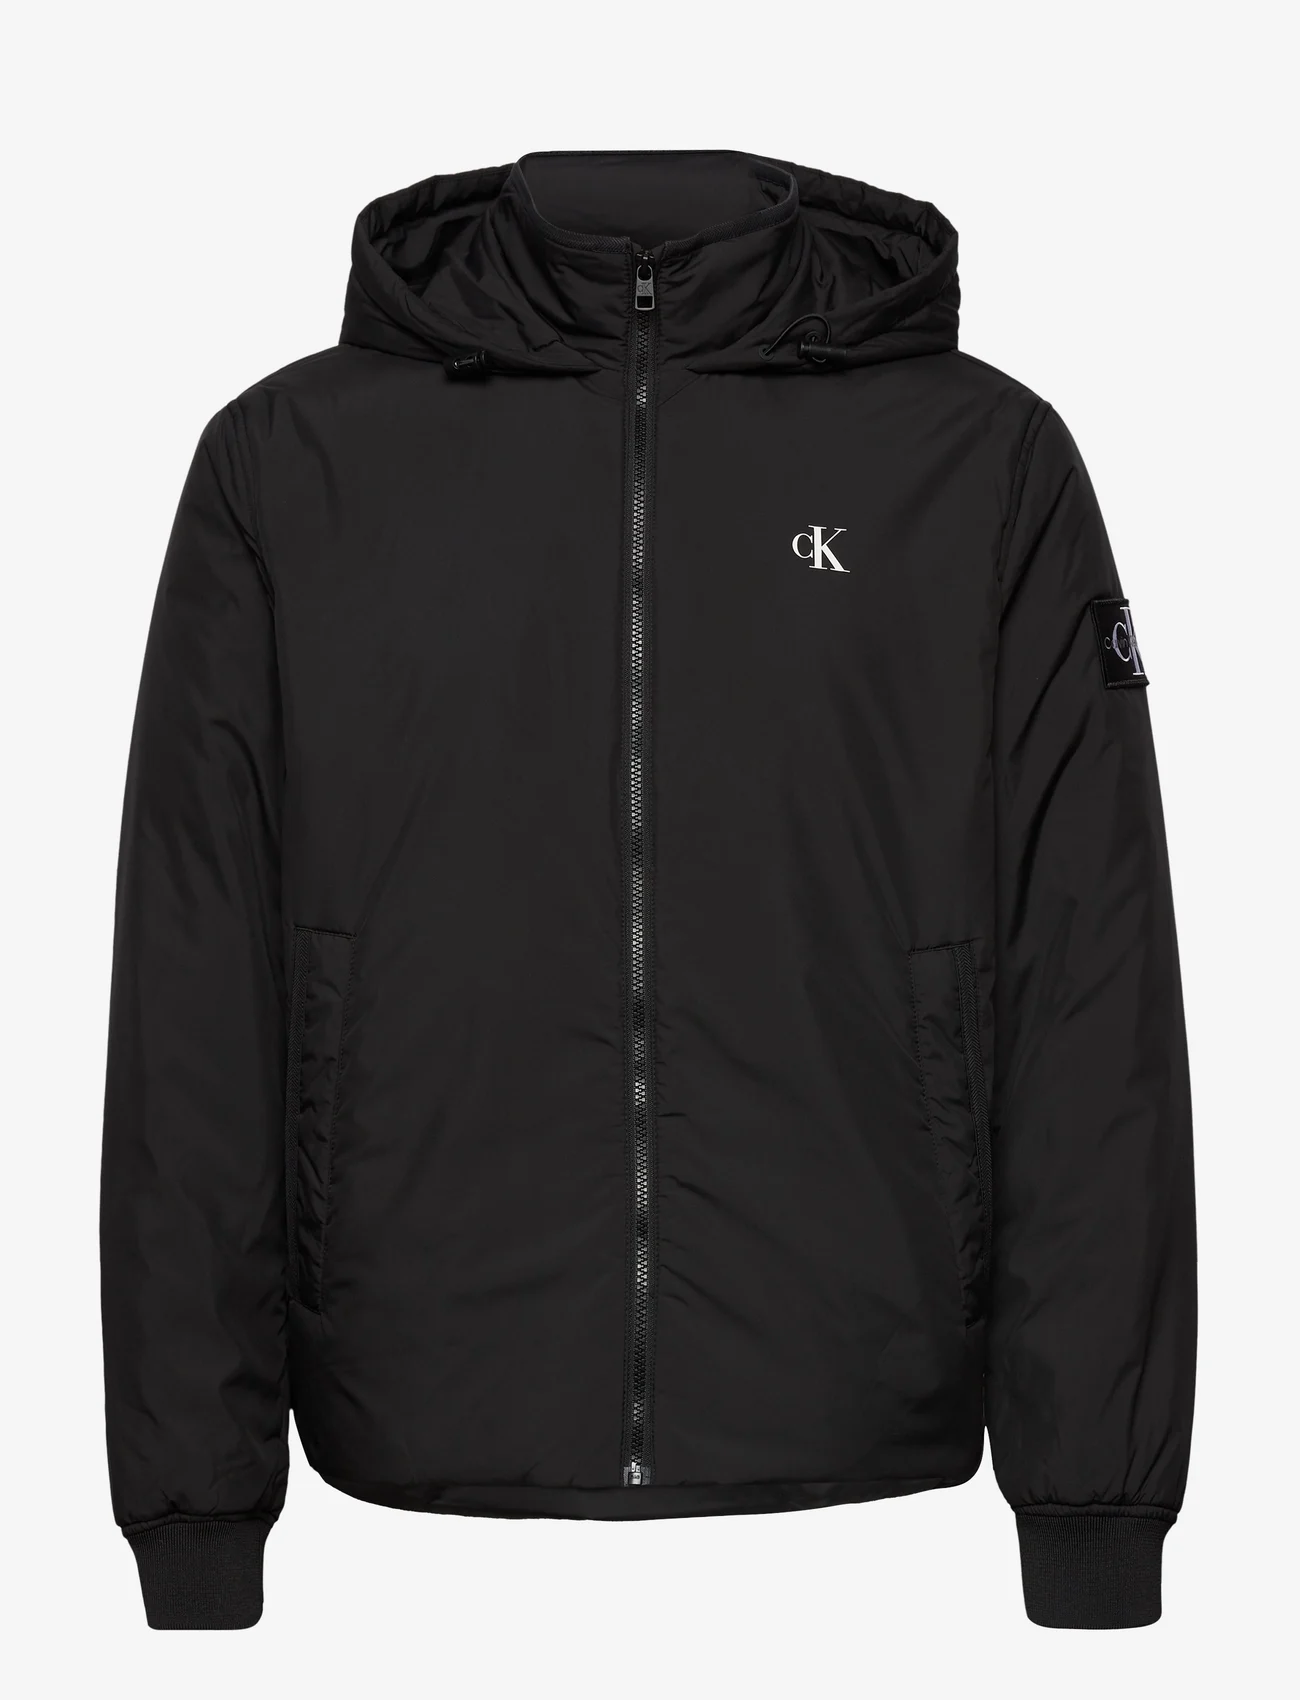 Calvin Klein Jeans Hooded Harrington Jacket  €. Buy Padded jackets  from Calvin Klein Jeans online at . Fast delivery and easy returns